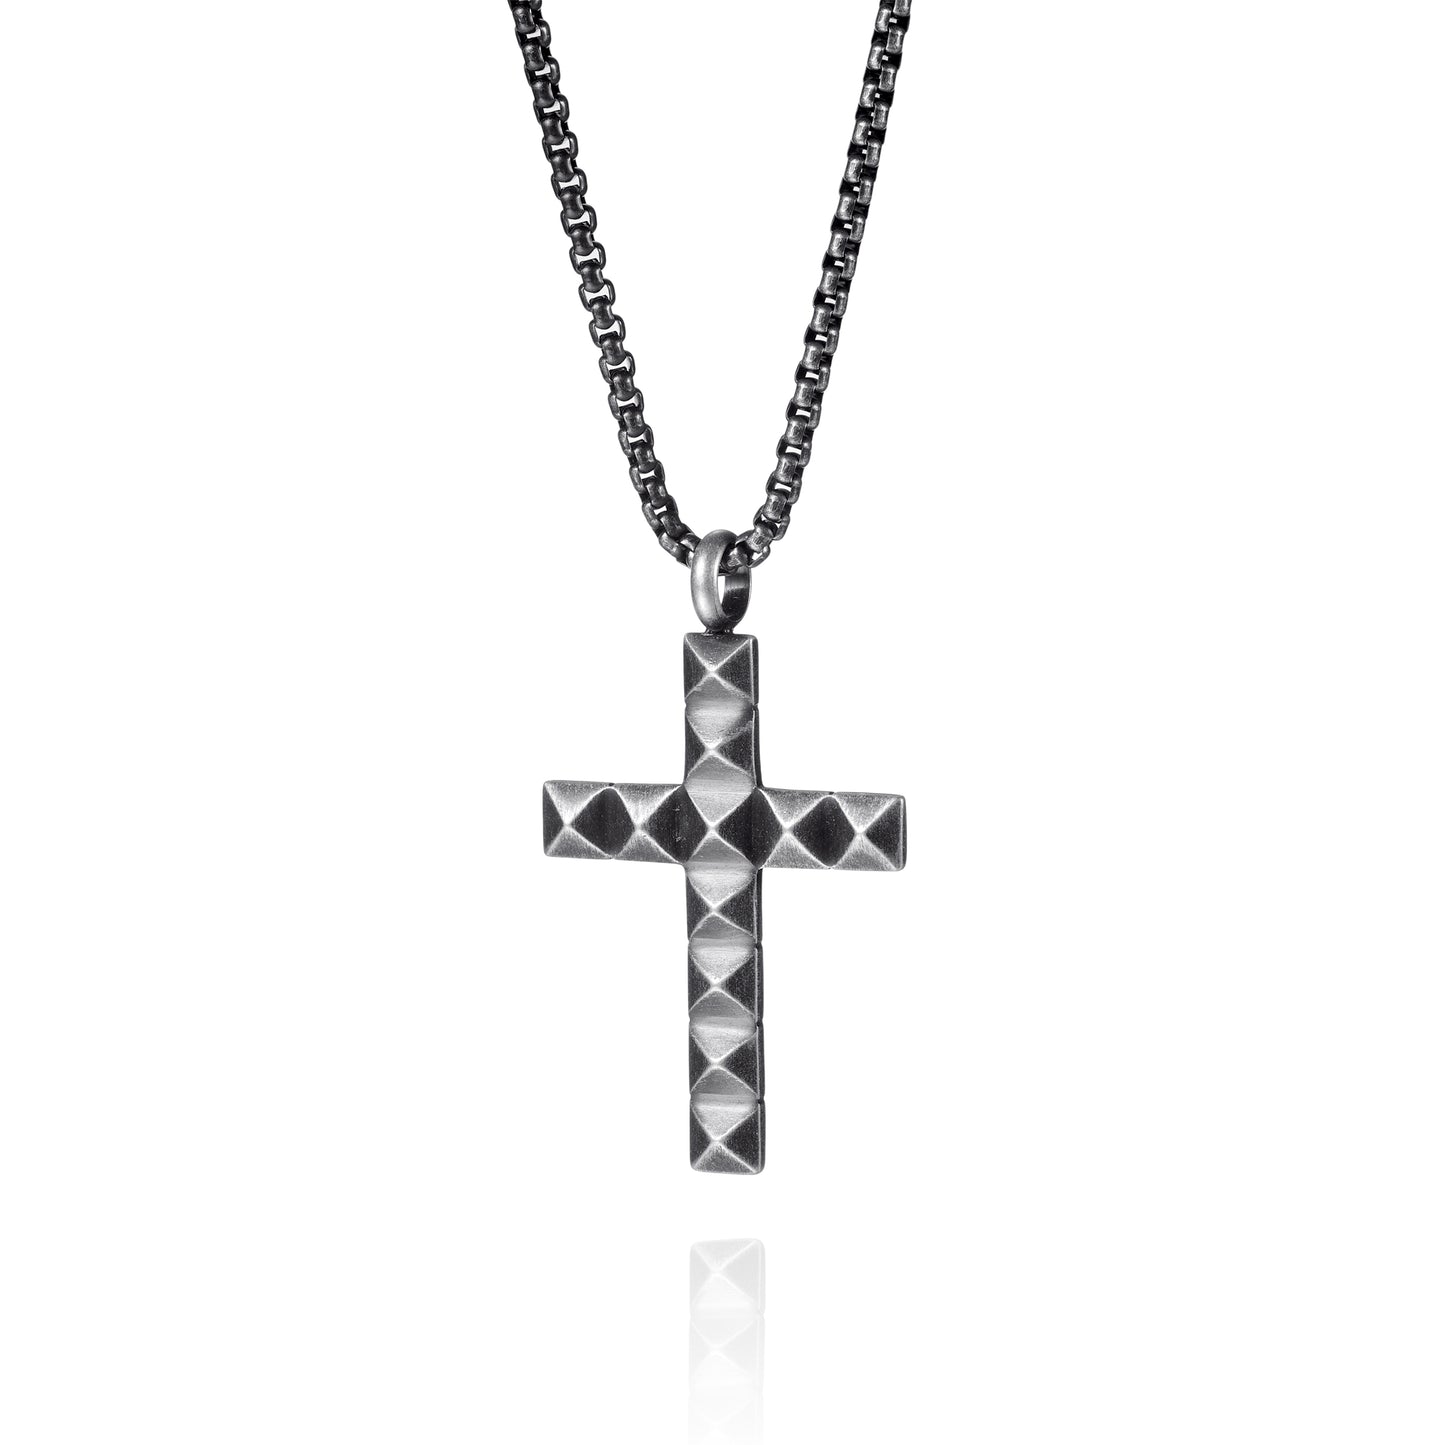 Vintage Stainless Steel Retro Cross Necklace